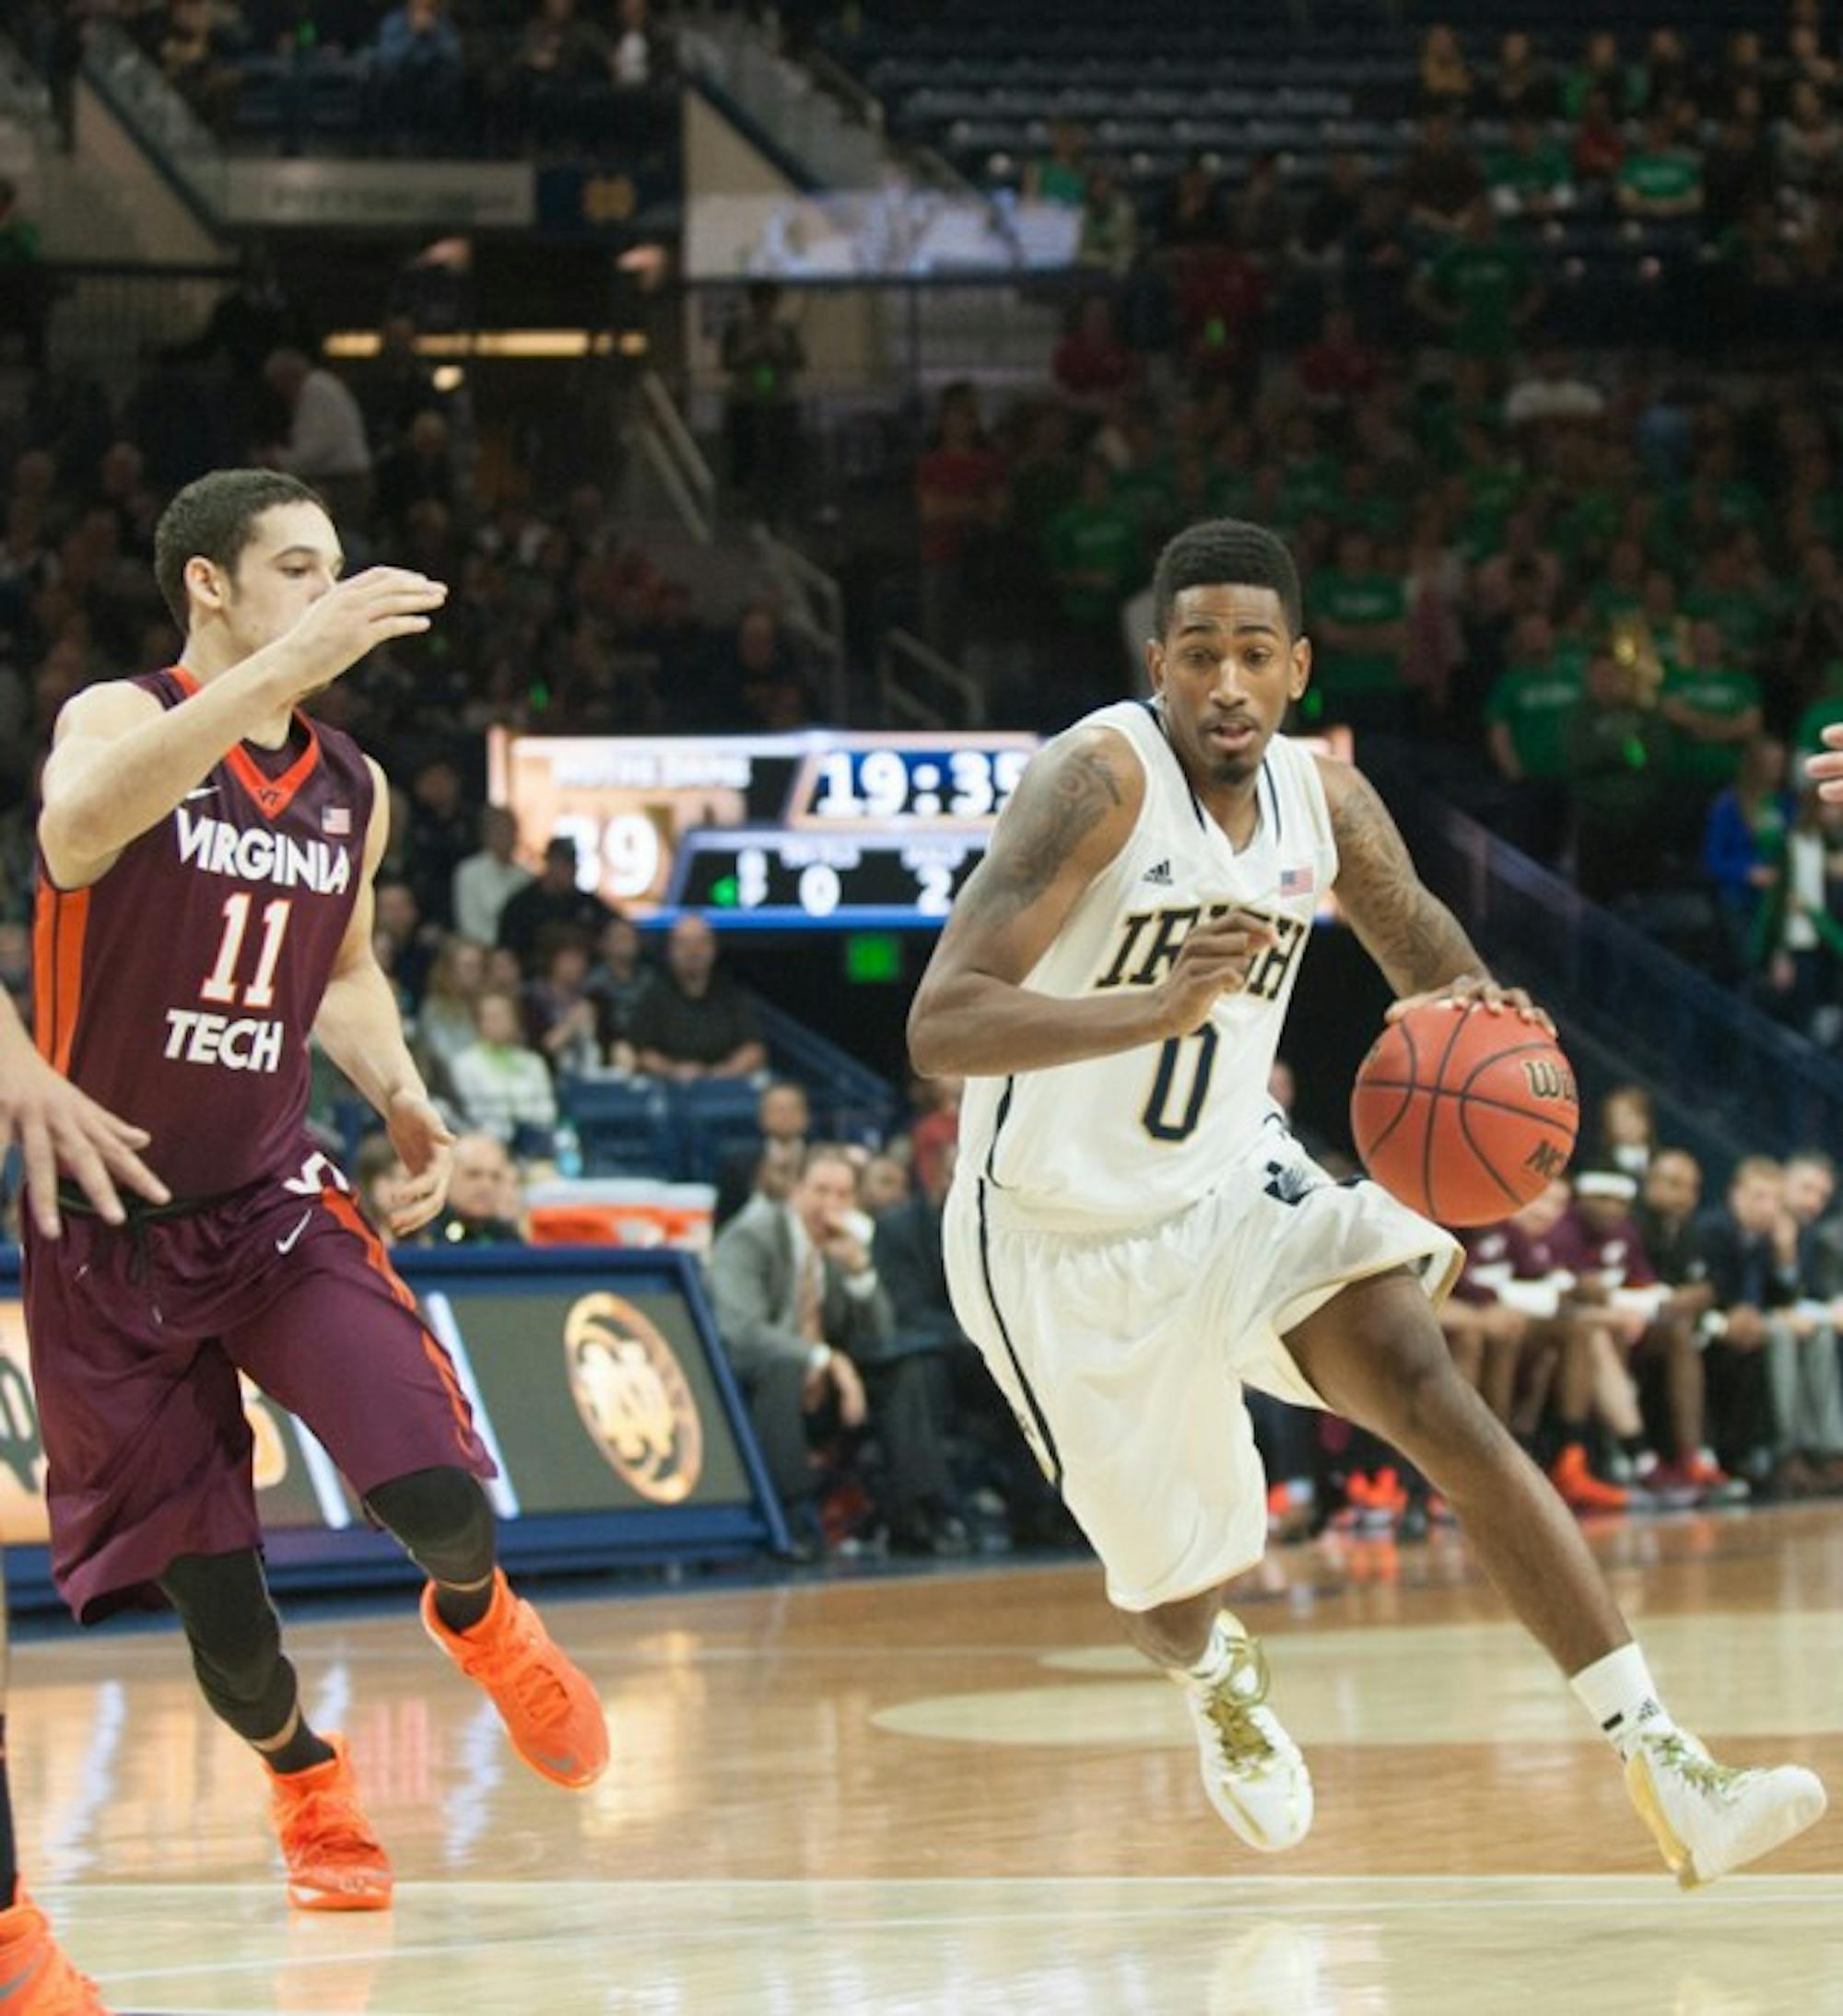 Irish senior guard Eric Atkins drives to the basket during Notre Dame's 70-63 win over Virginia Tech on Sunday. Atkins scored 24 points in Notre Dame's 76-74 loss at Florida State on Tuesday evening.